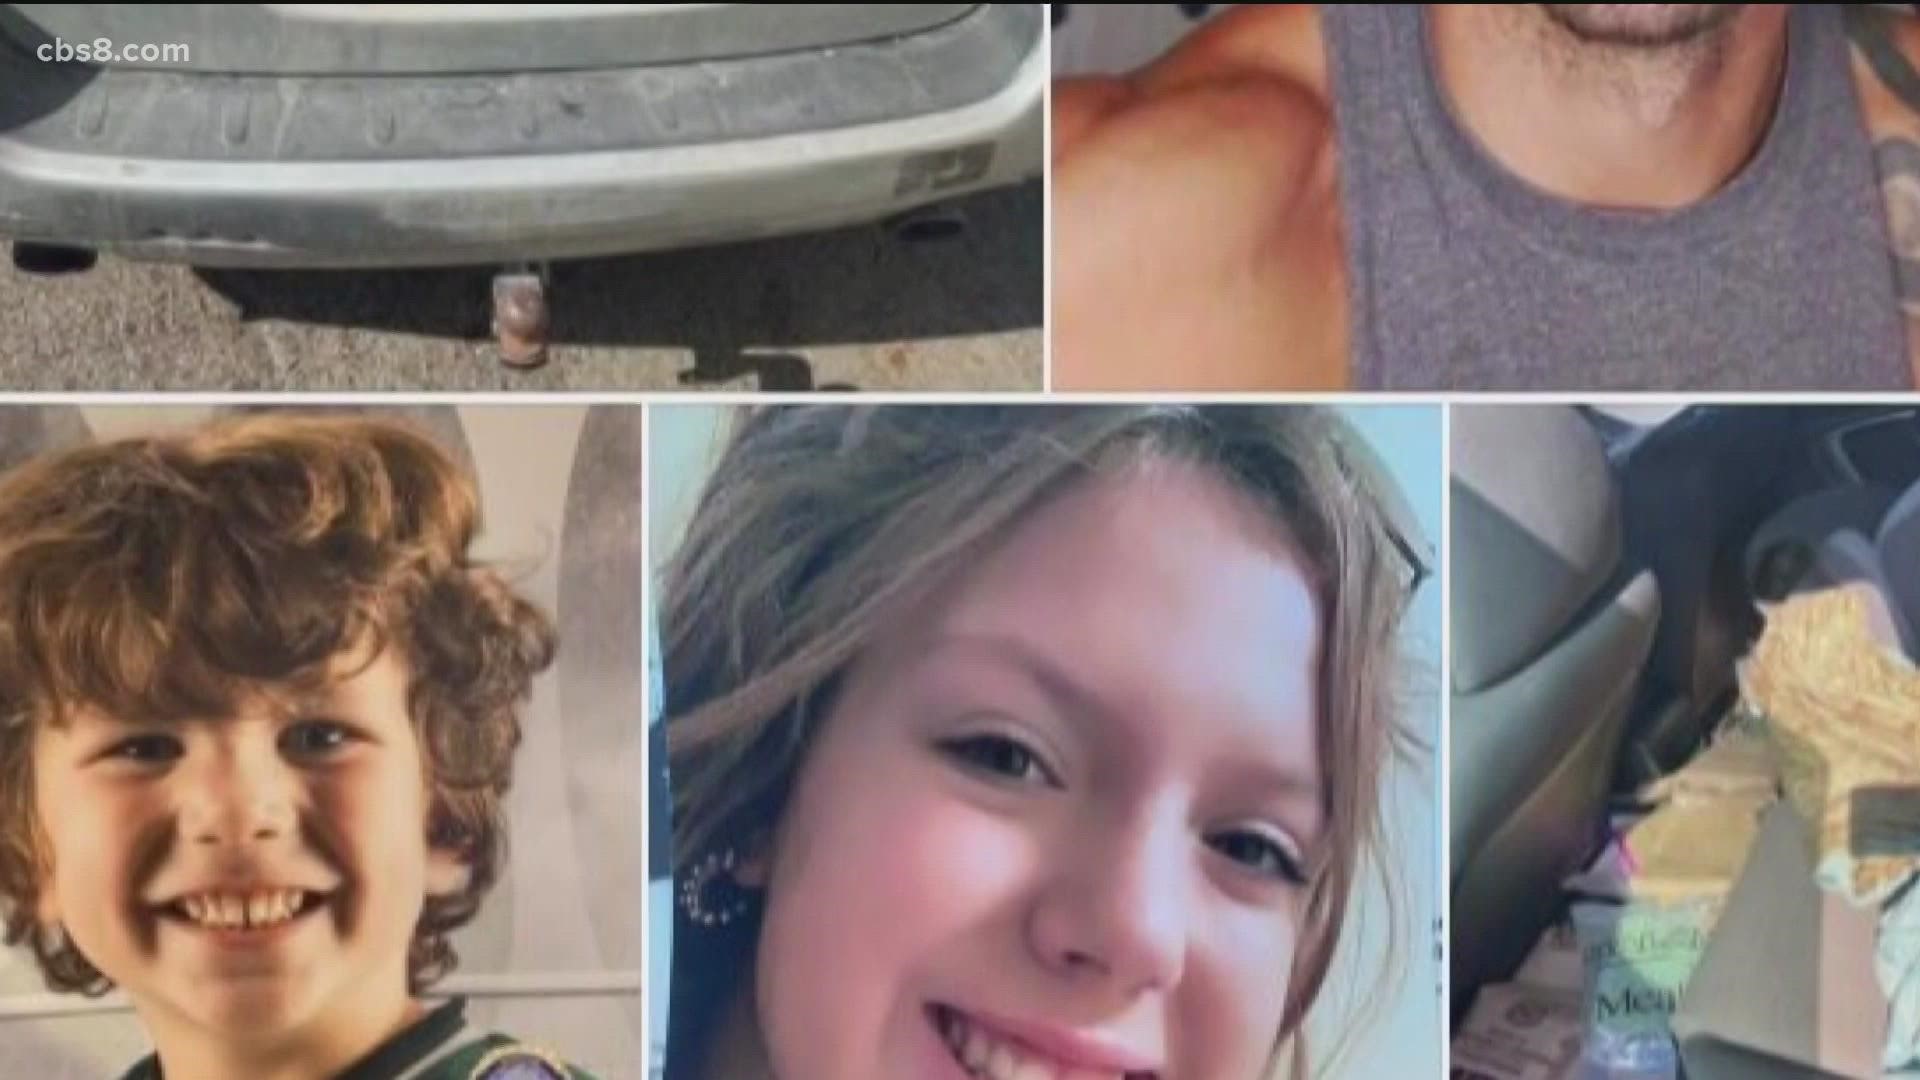 The search for two missing kids that spanned Tennessee, Kentucky, Arizona and California is now over.